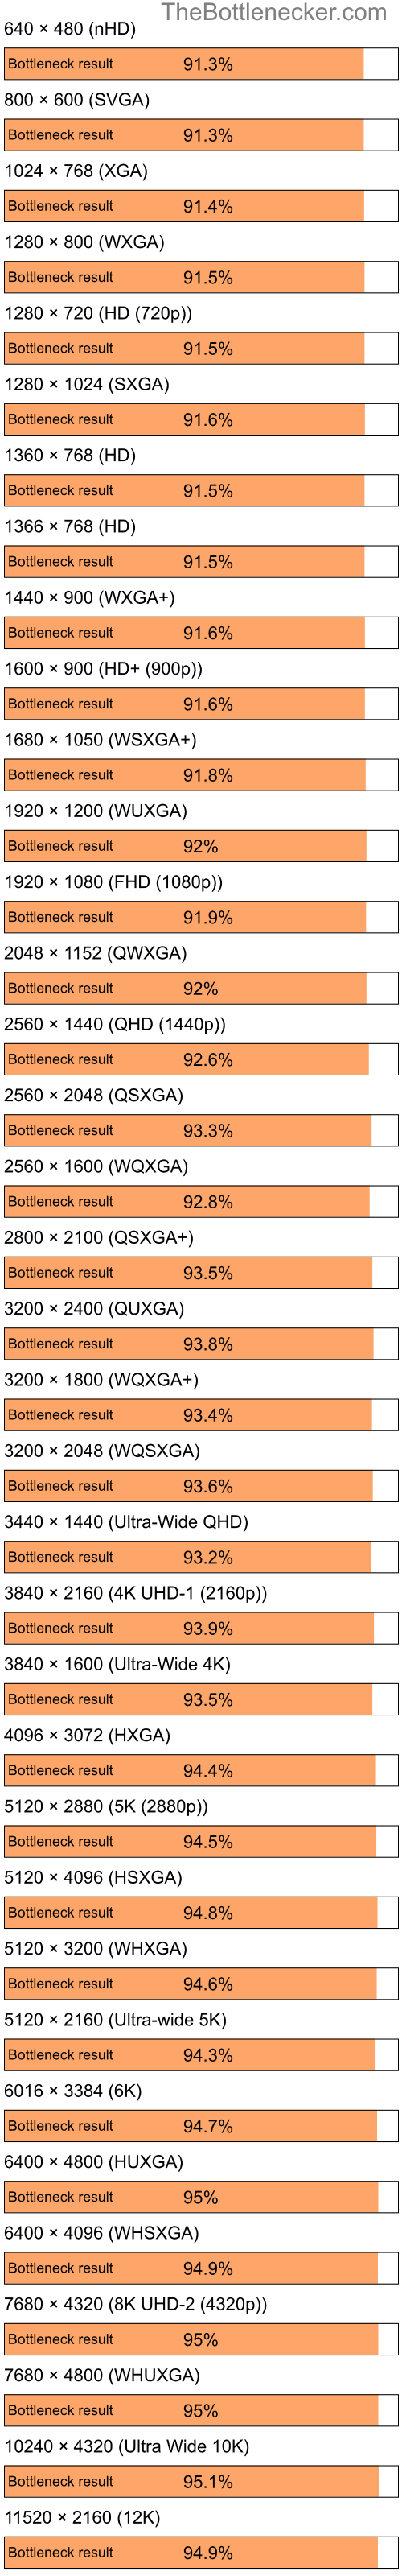 Bottleneck results by resolution for Intel Pentium 4 and NVIDIA GeForce4 Ti 4600 in Graphic Card Intense Tasks